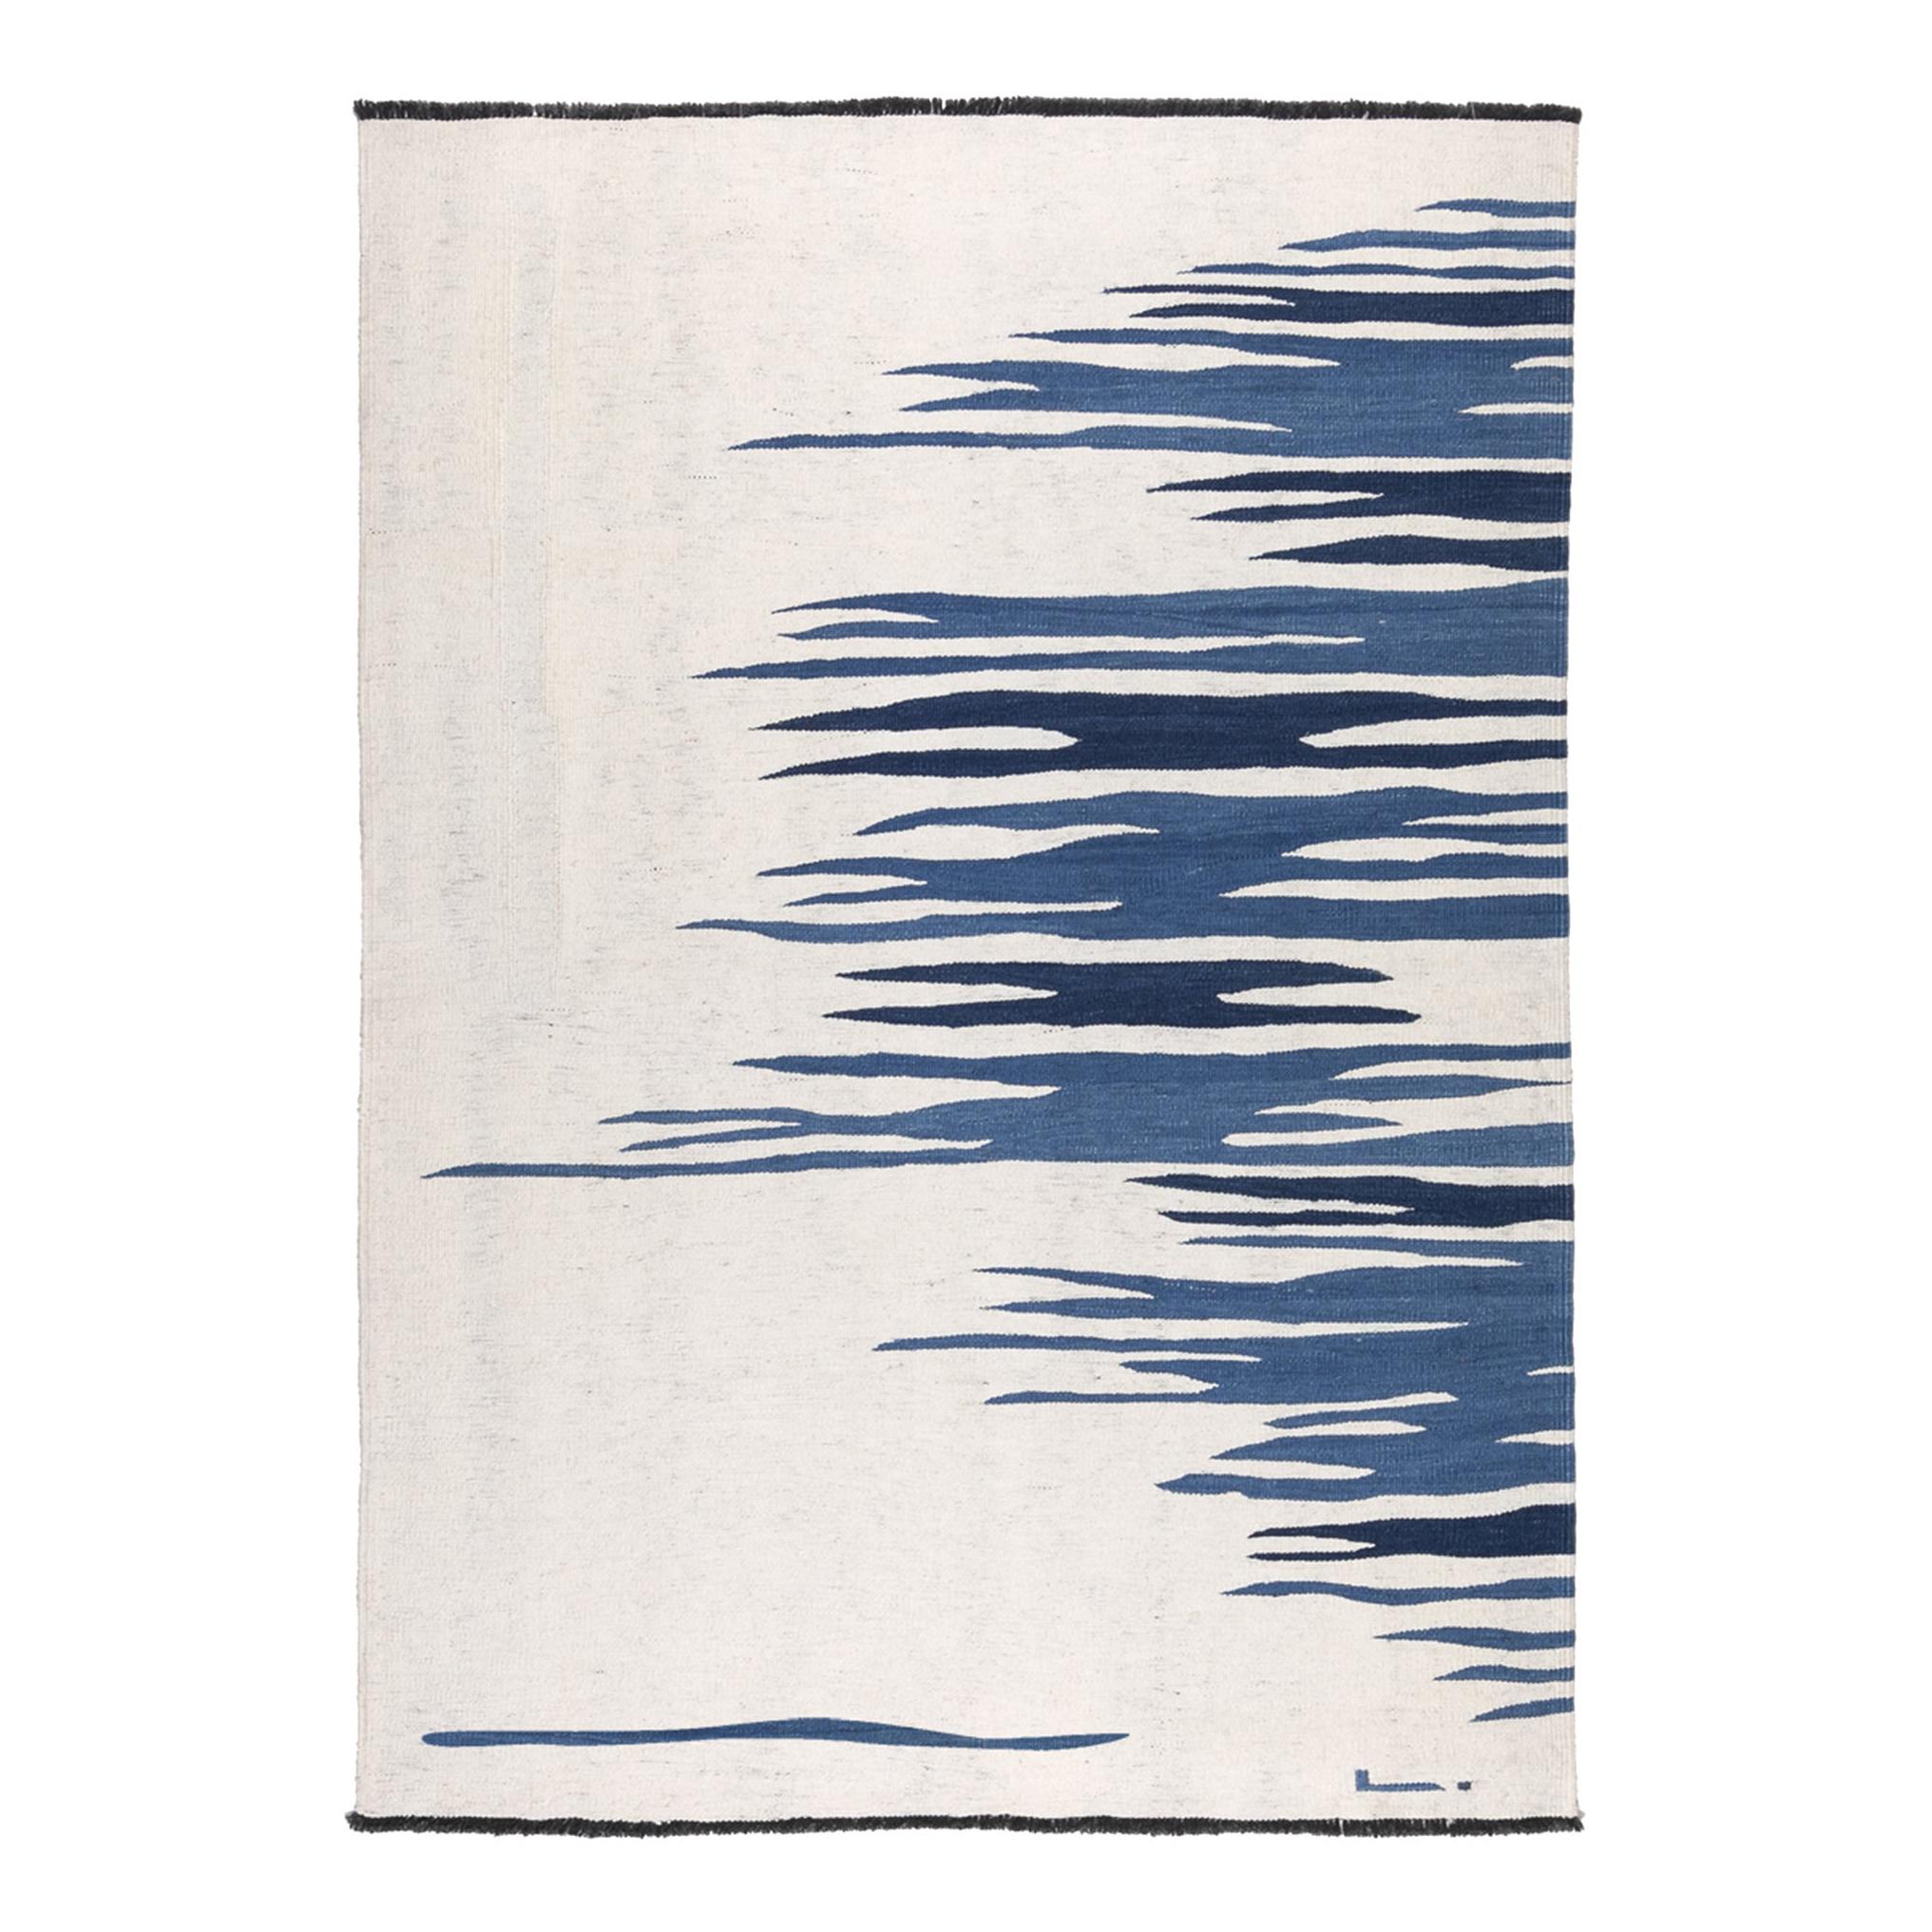 Ege No 2 Contemporary Modern Kilim Rug Wool Handwoven Dune White and Blue For Sale